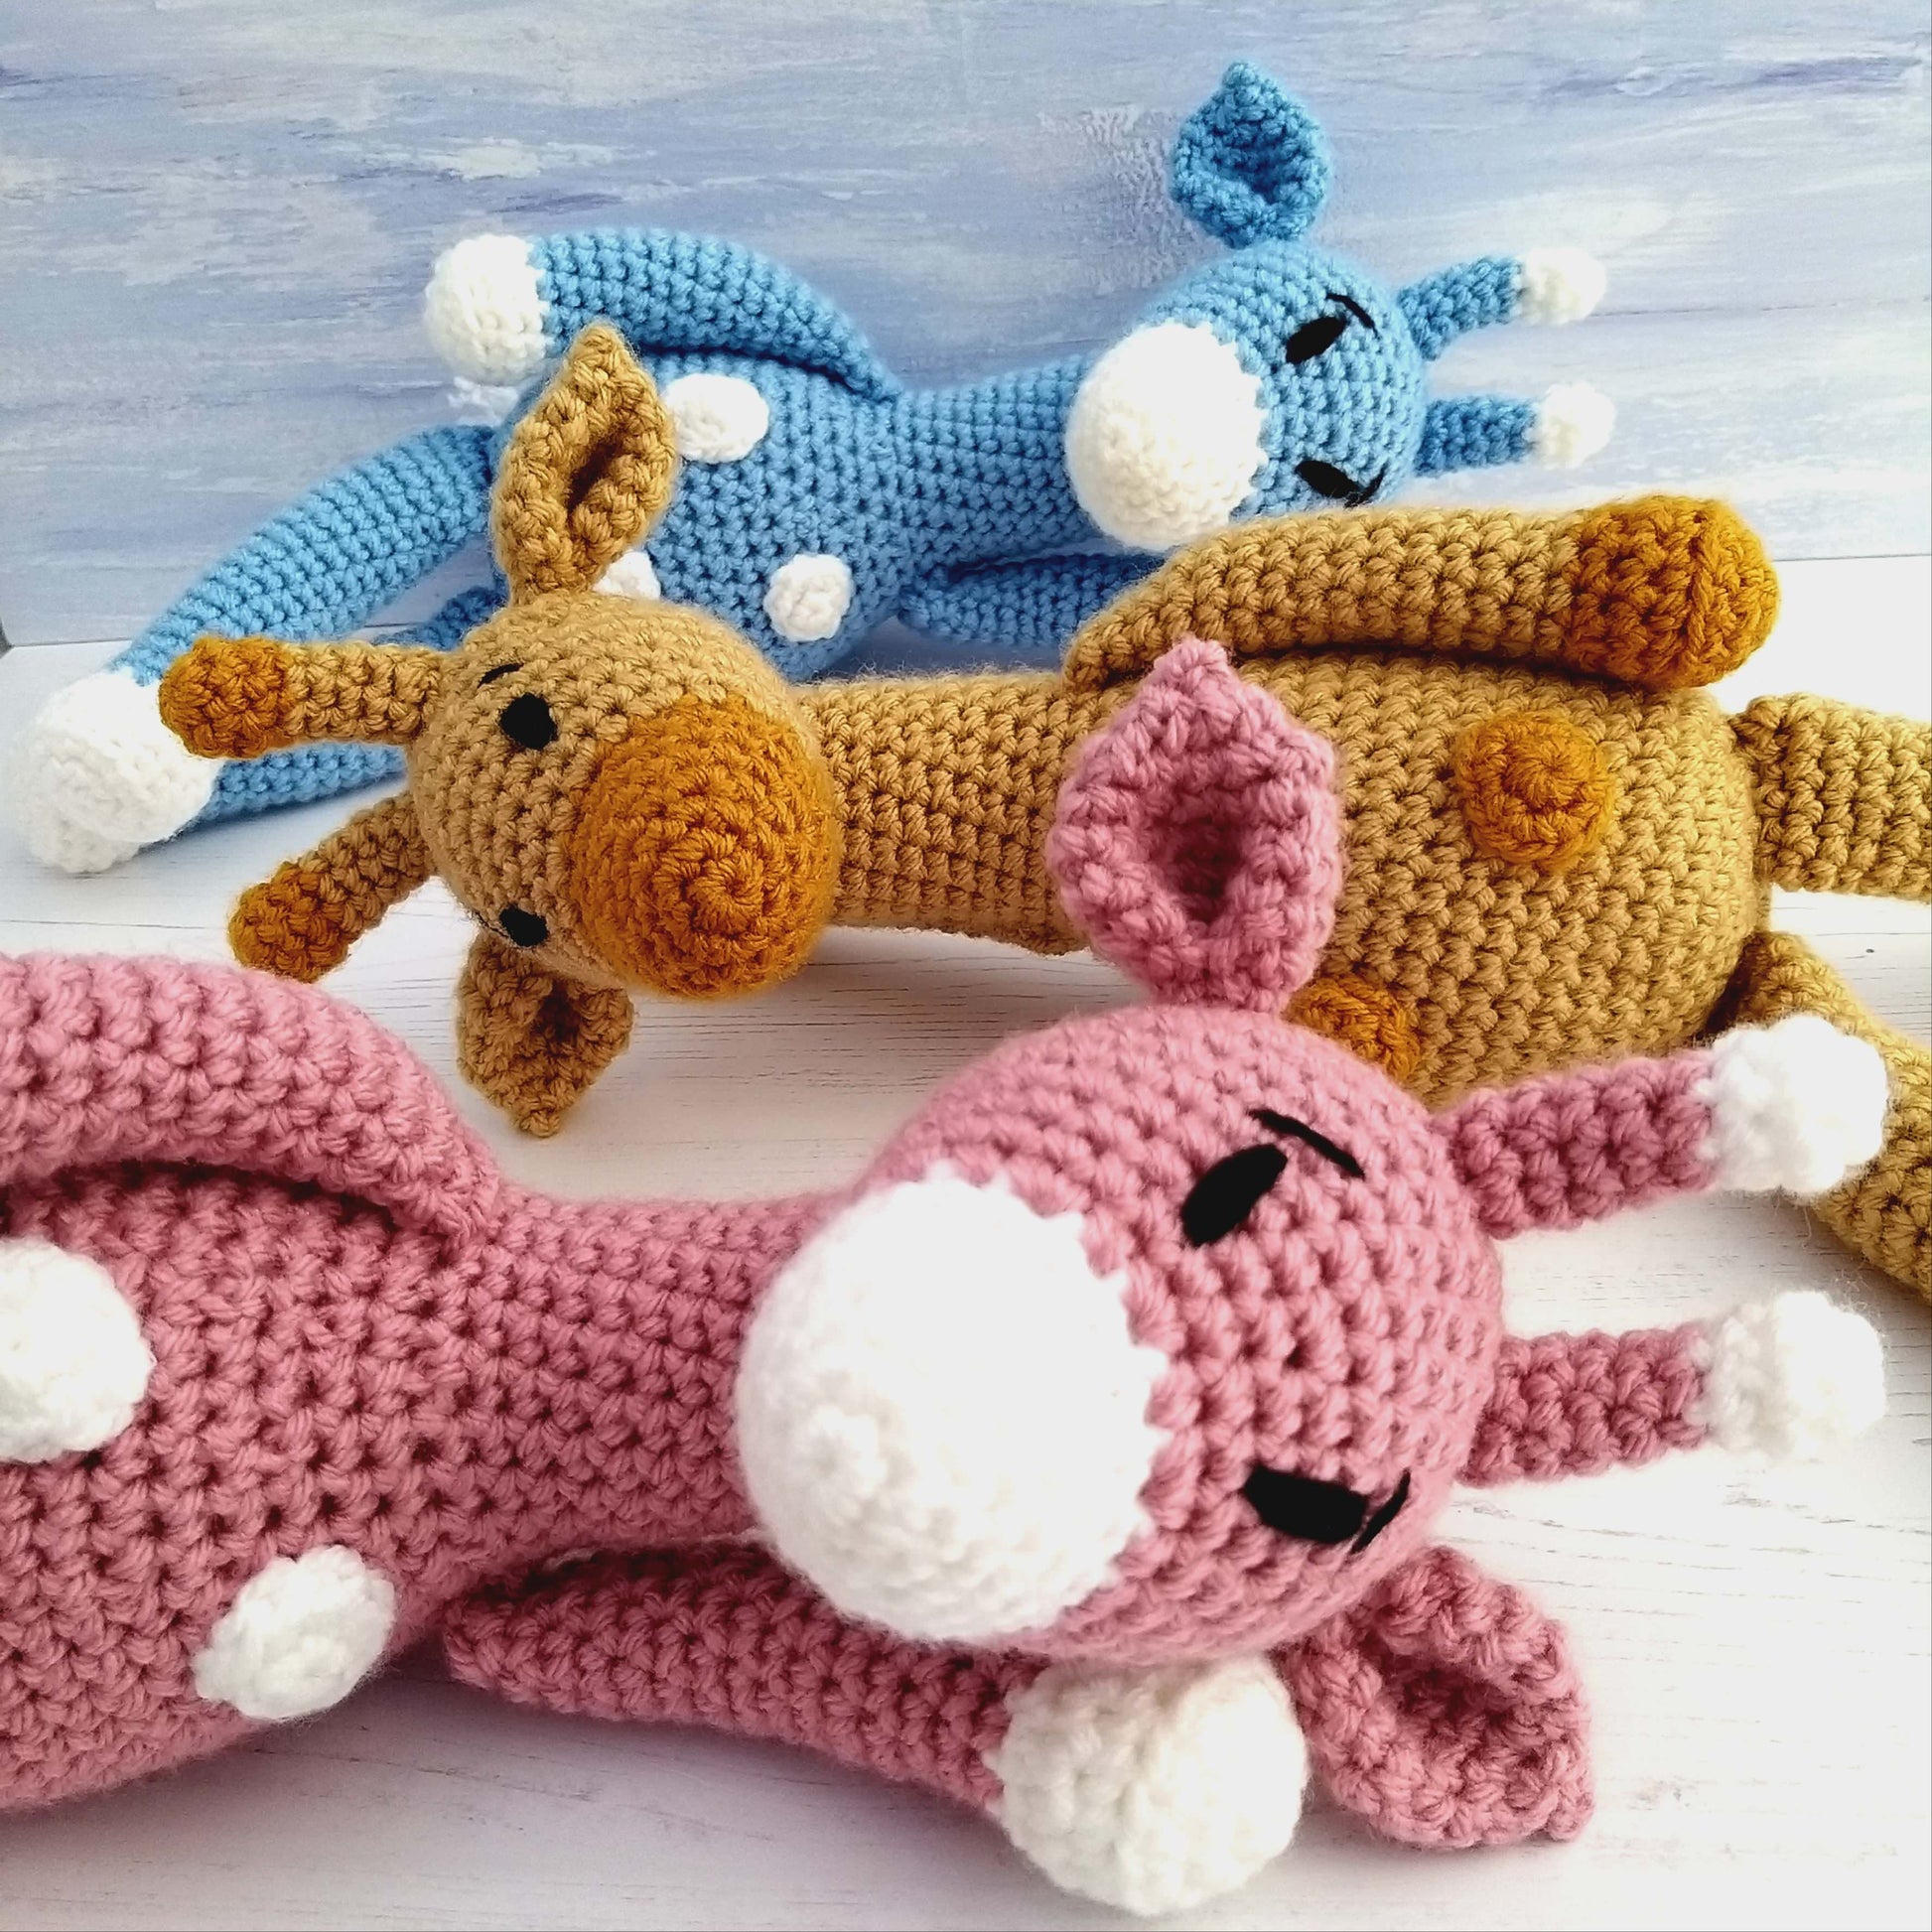 Toy Giraffe Crochet Kit for Beginners - finished giraffe toys in pink, yellow and blue